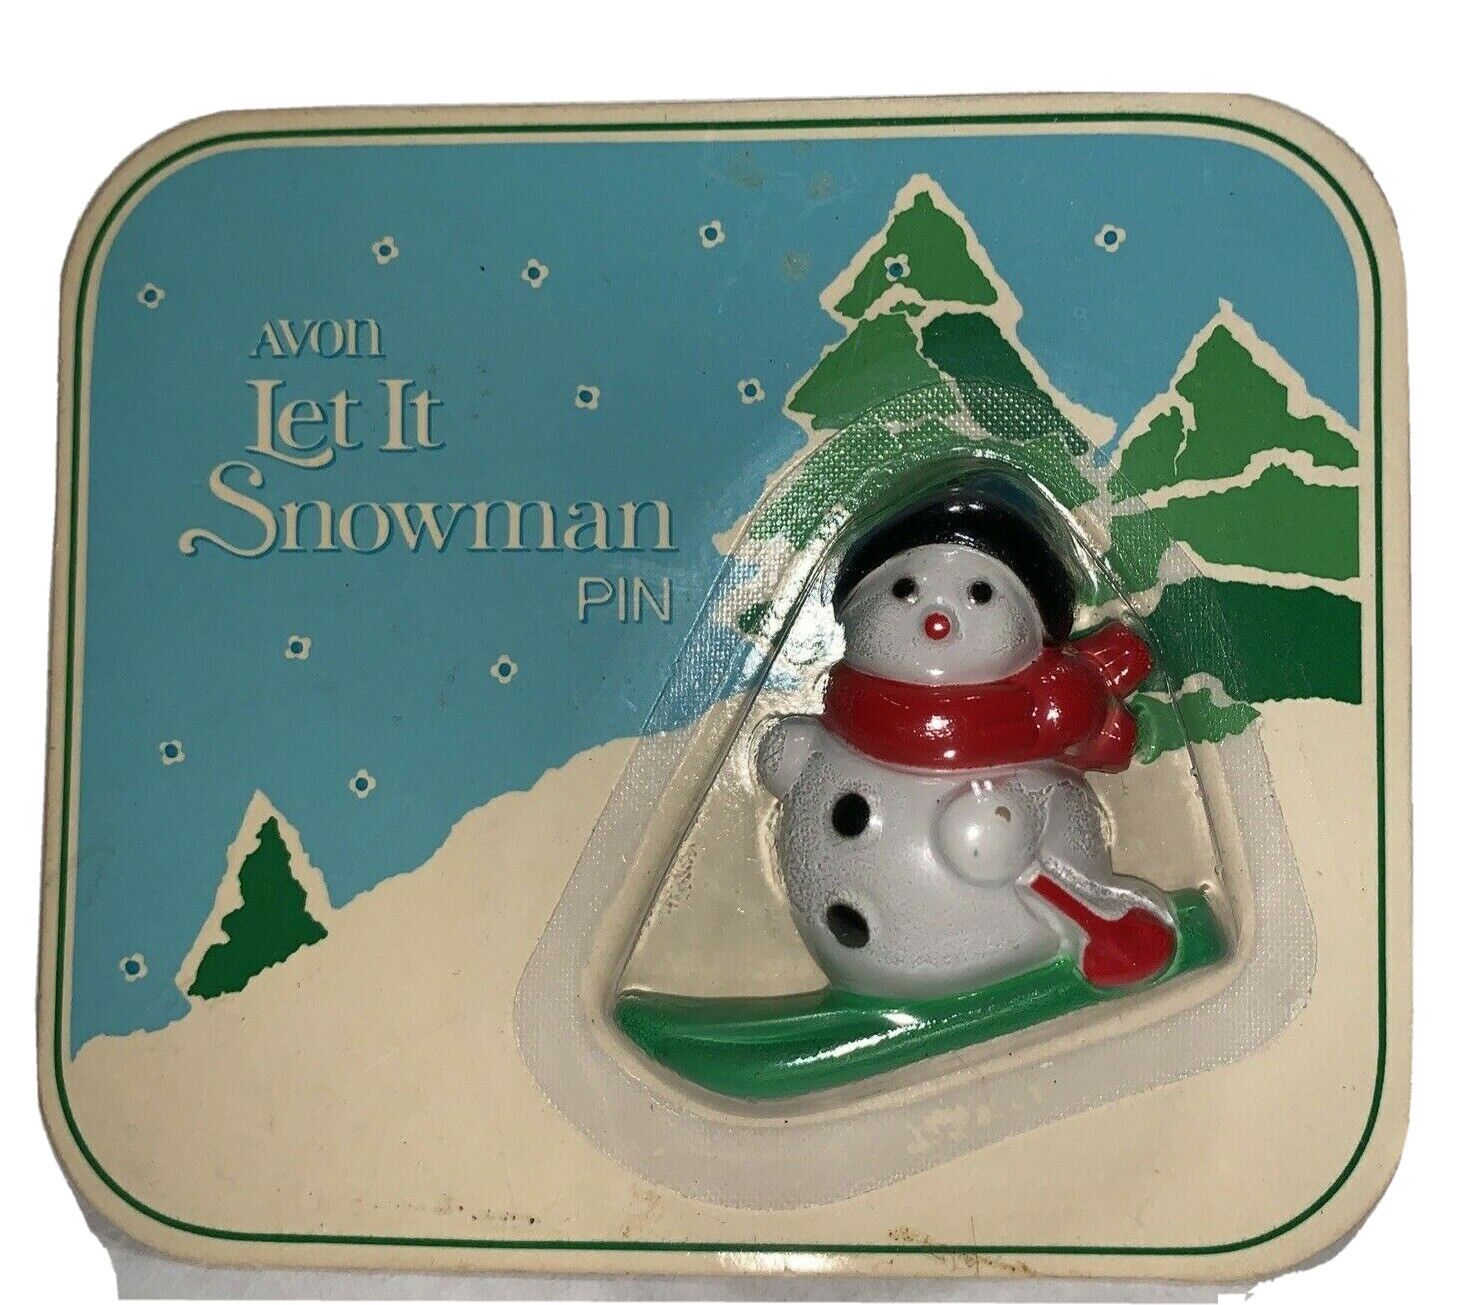 Vintage 1982 Avon Let it Snowman Pin Skis Snow Skiing Holiday Brooch Winter